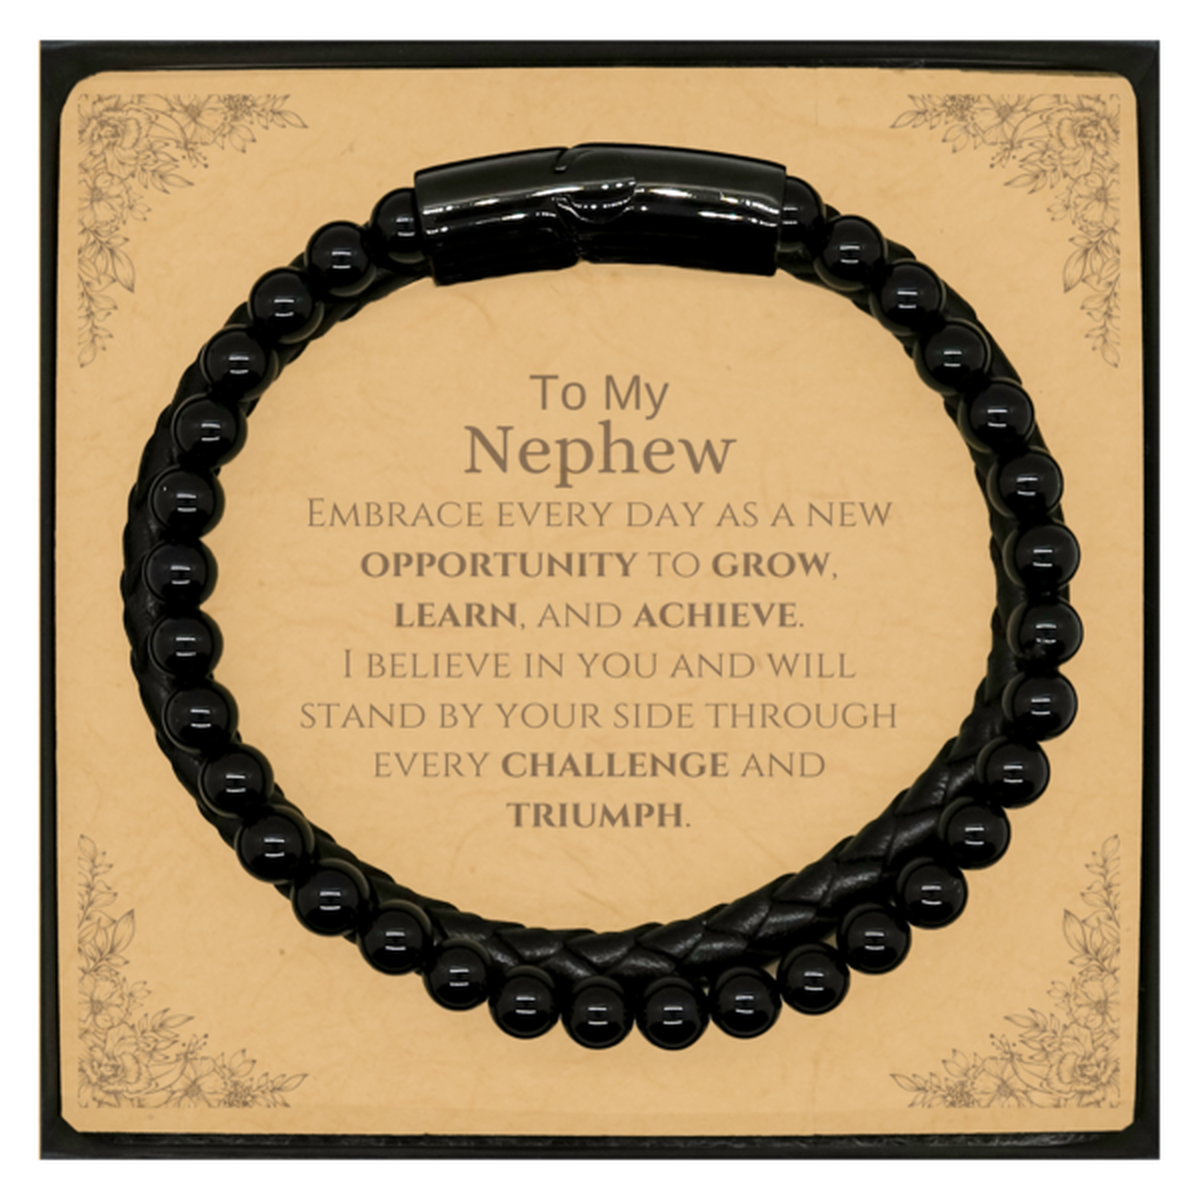 To My Nephew Gifts, I believe in you and will stand by your side, Inspirational Stone Leather Bracelets For Nephew, Birthday Christmas Motivational Nephew Gifts